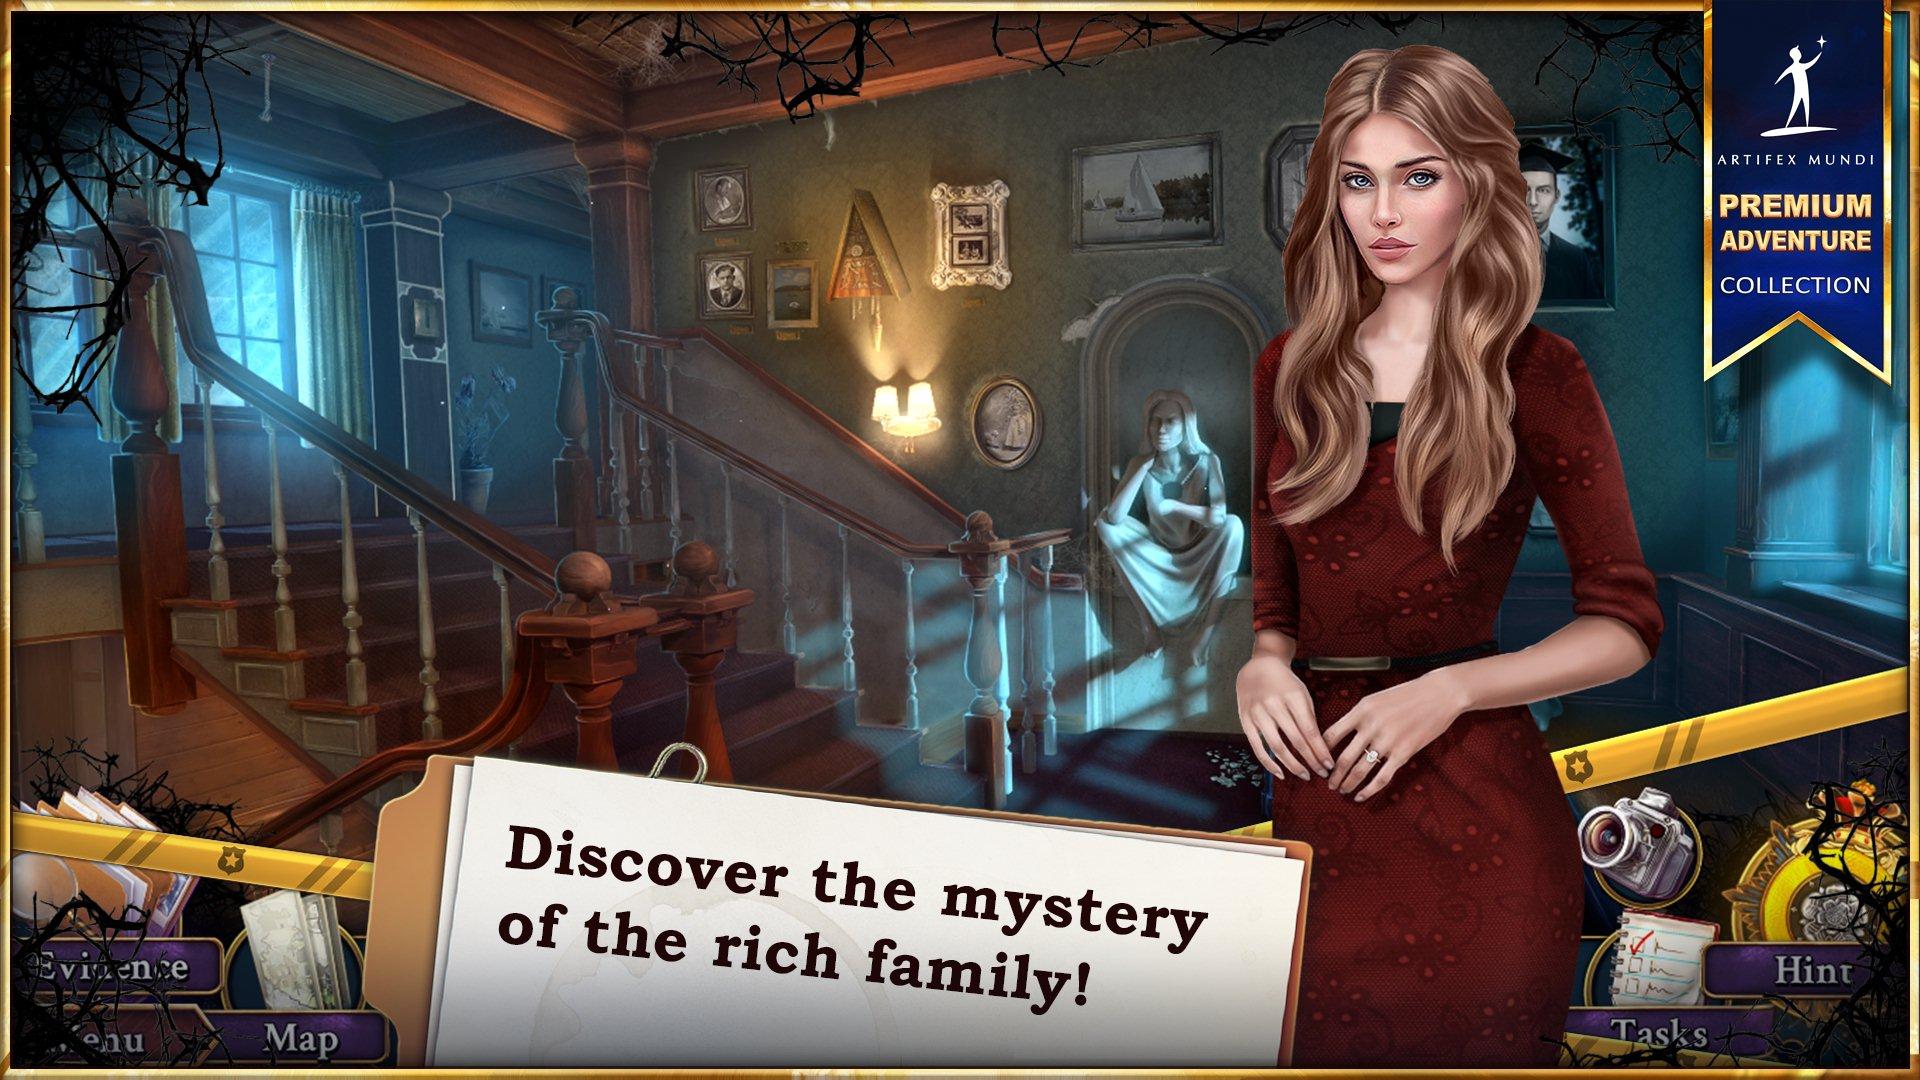 Path of Sin: Greed for apple download